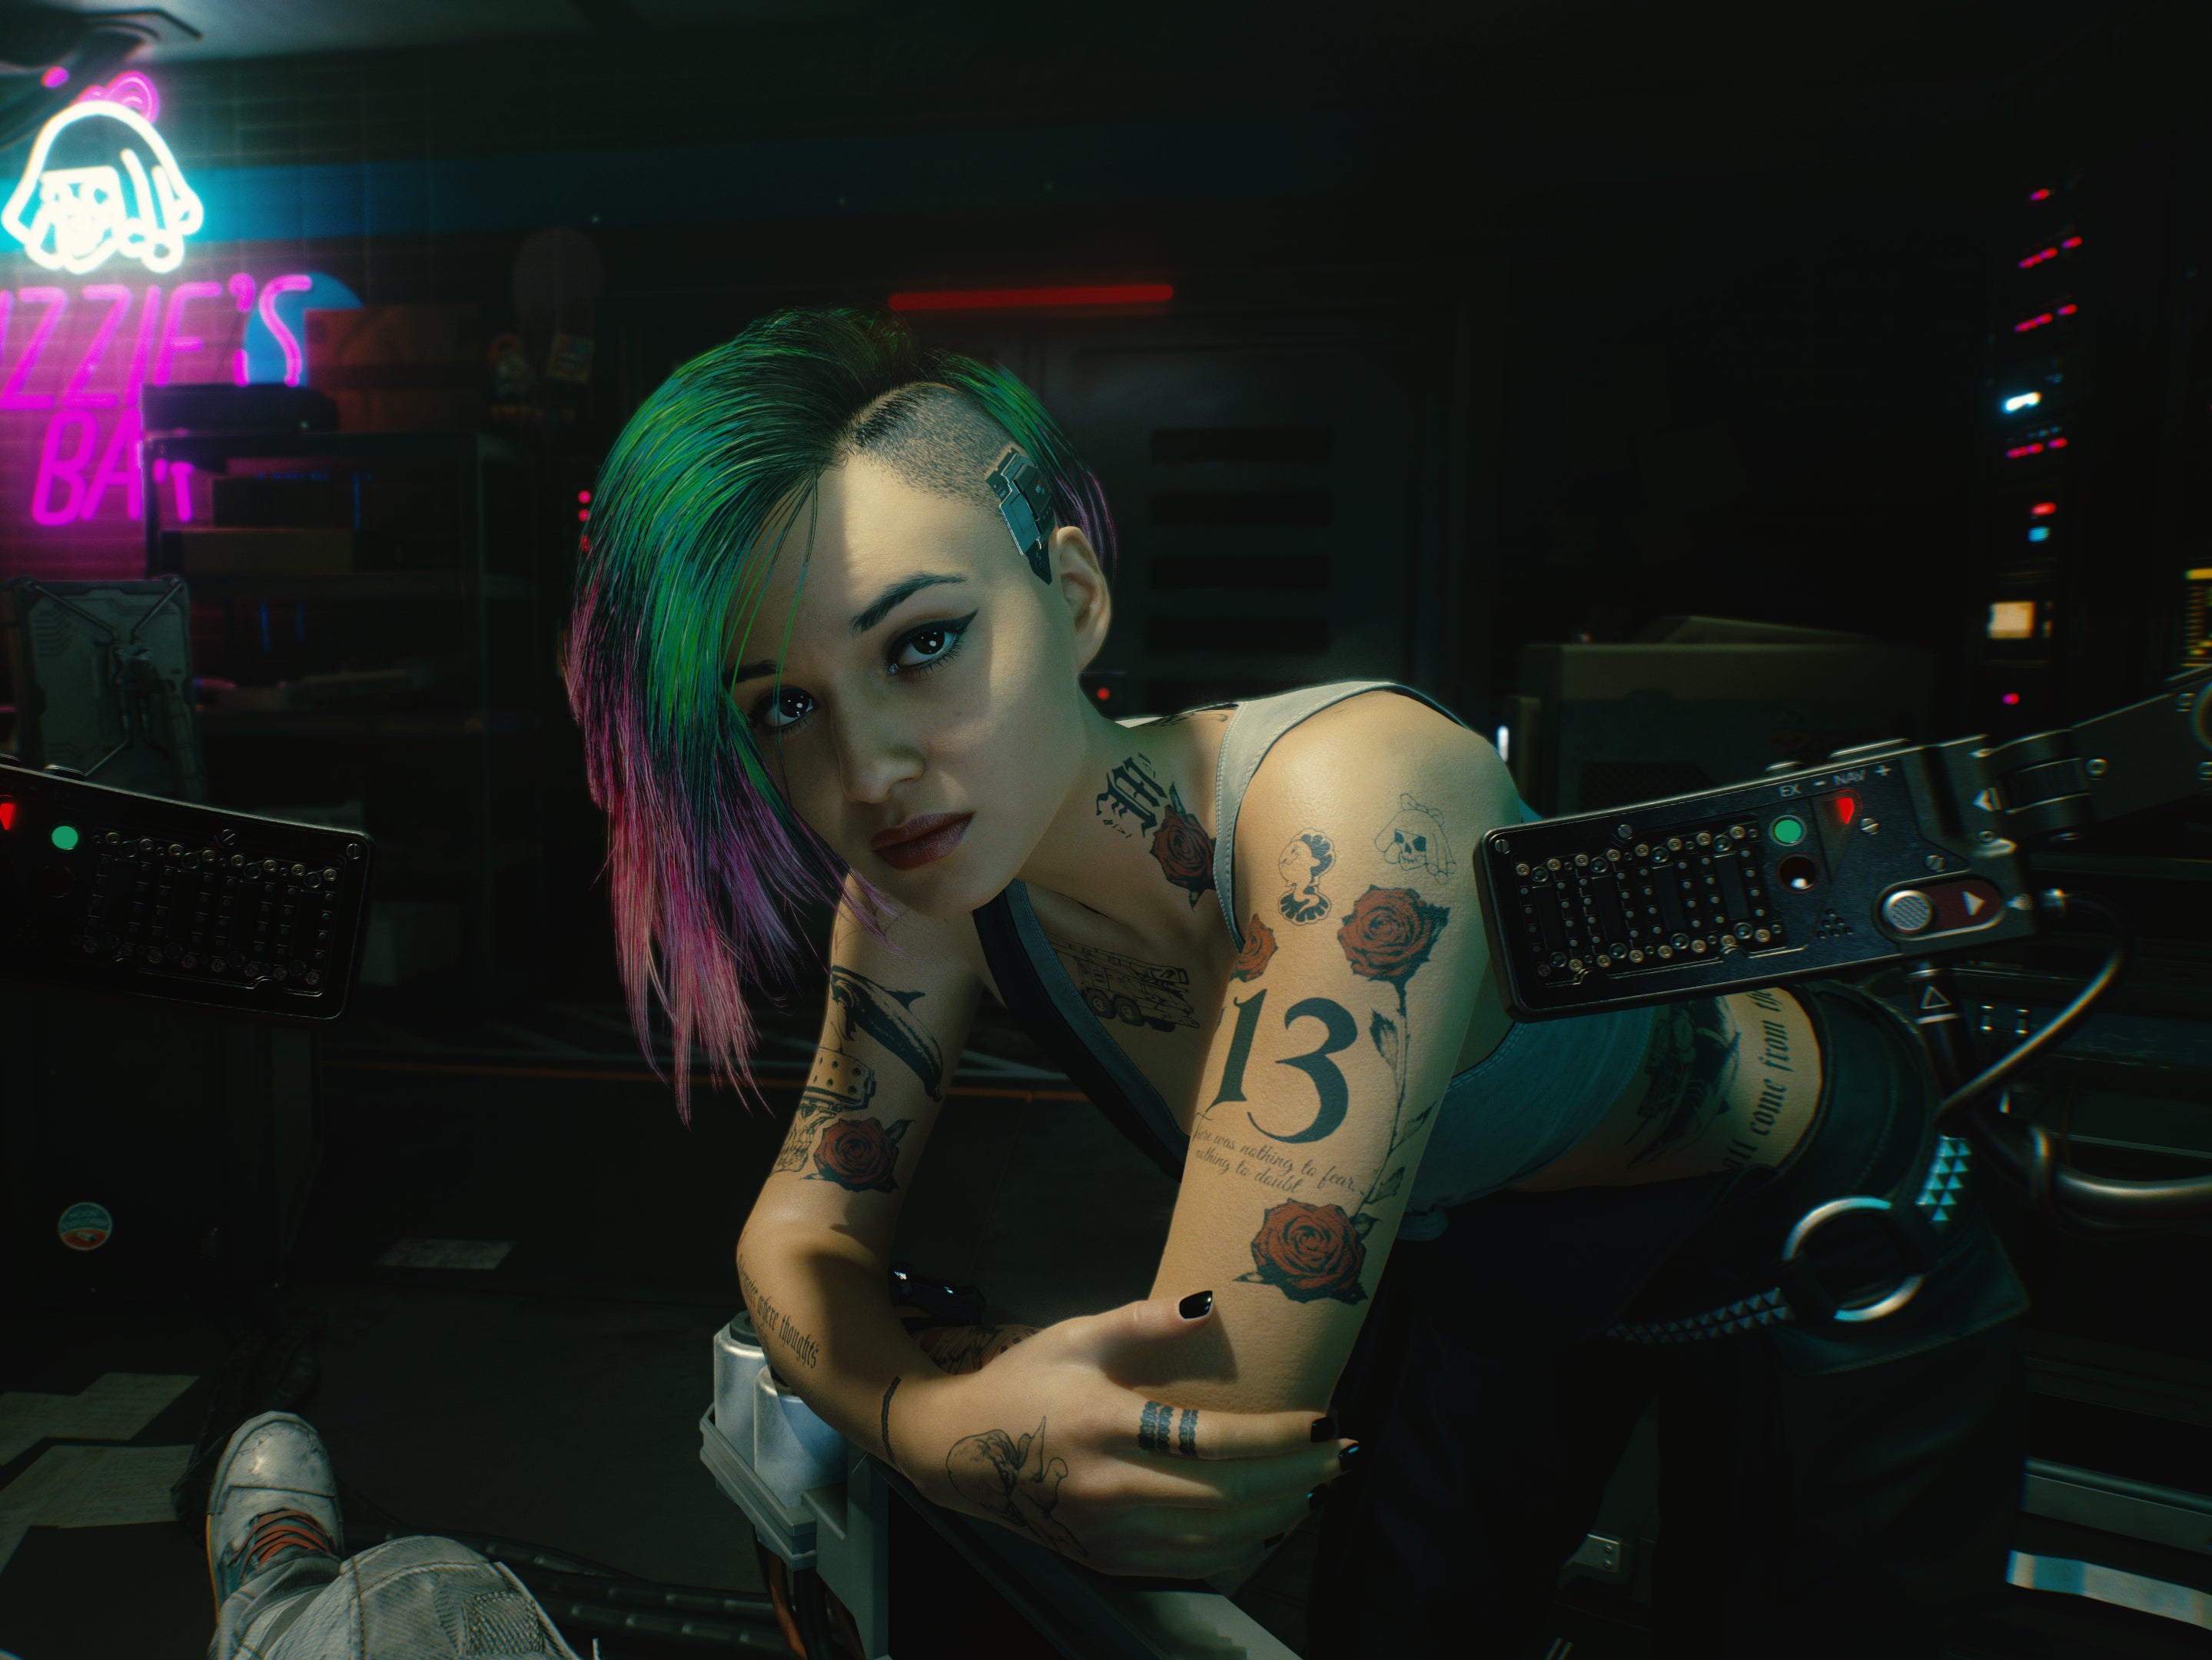 Cyberpunk 2077 is set in a future dystopia known as Night City